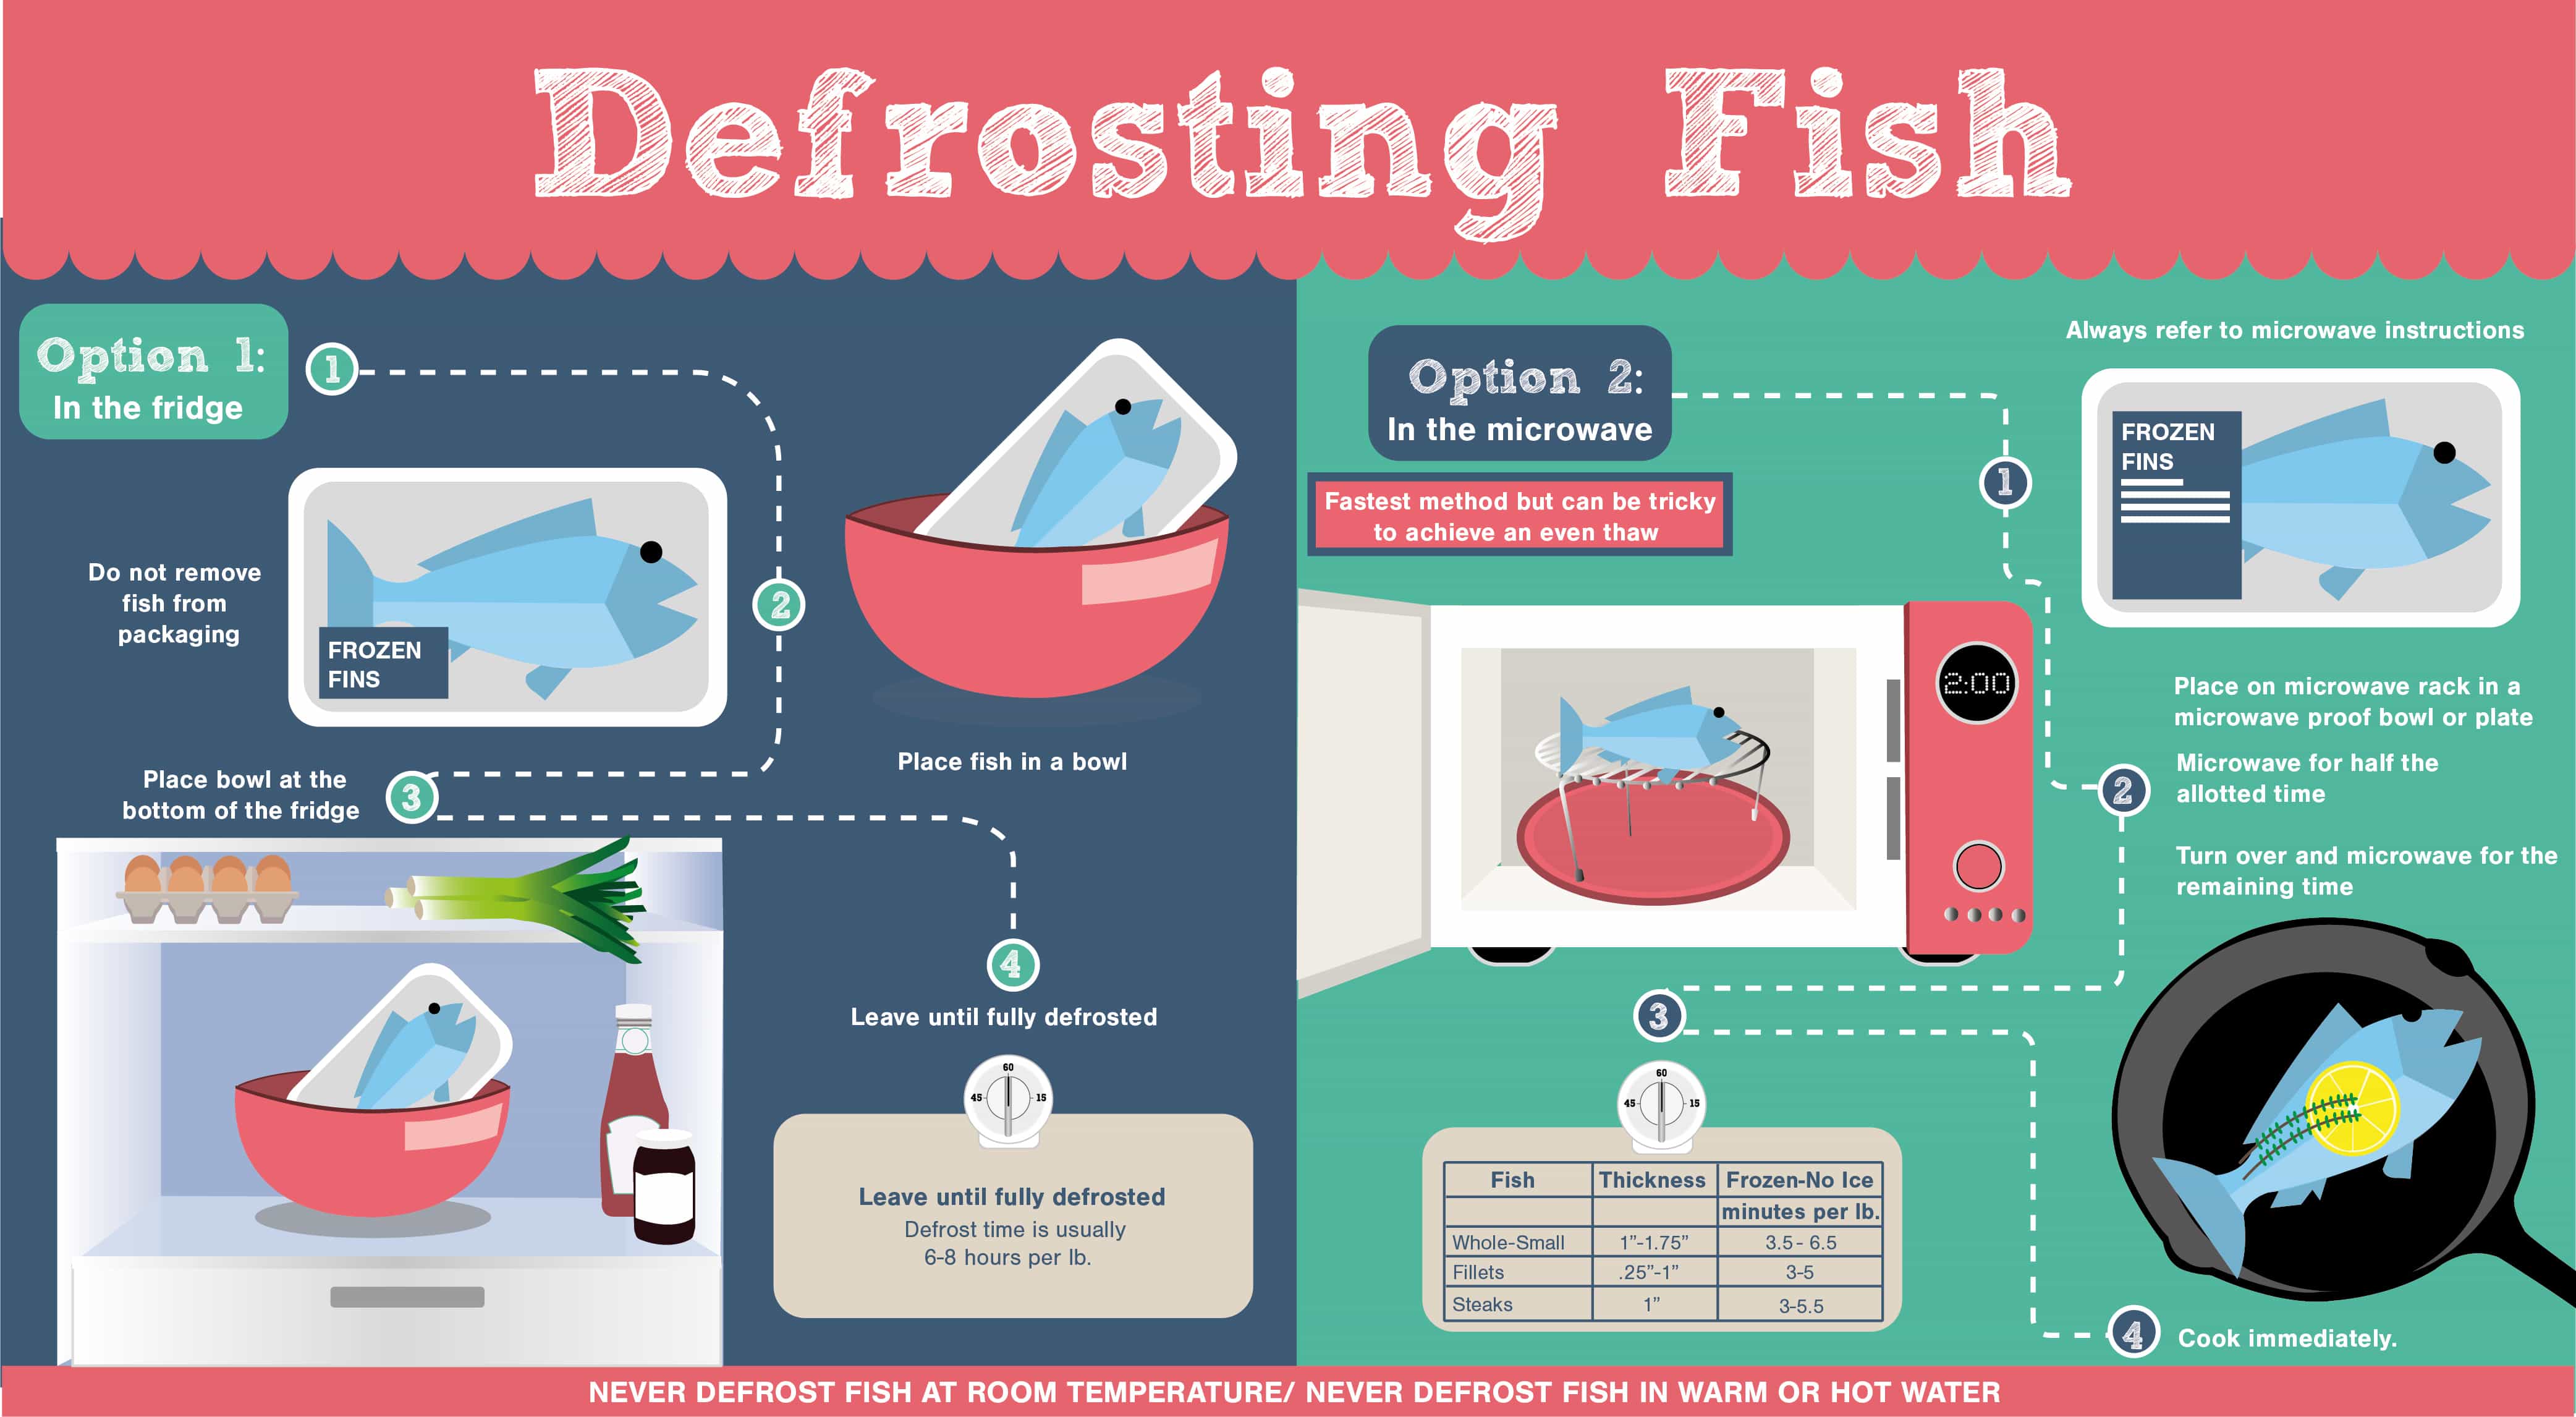 Defrosting Fish - Fresh from the Freezer